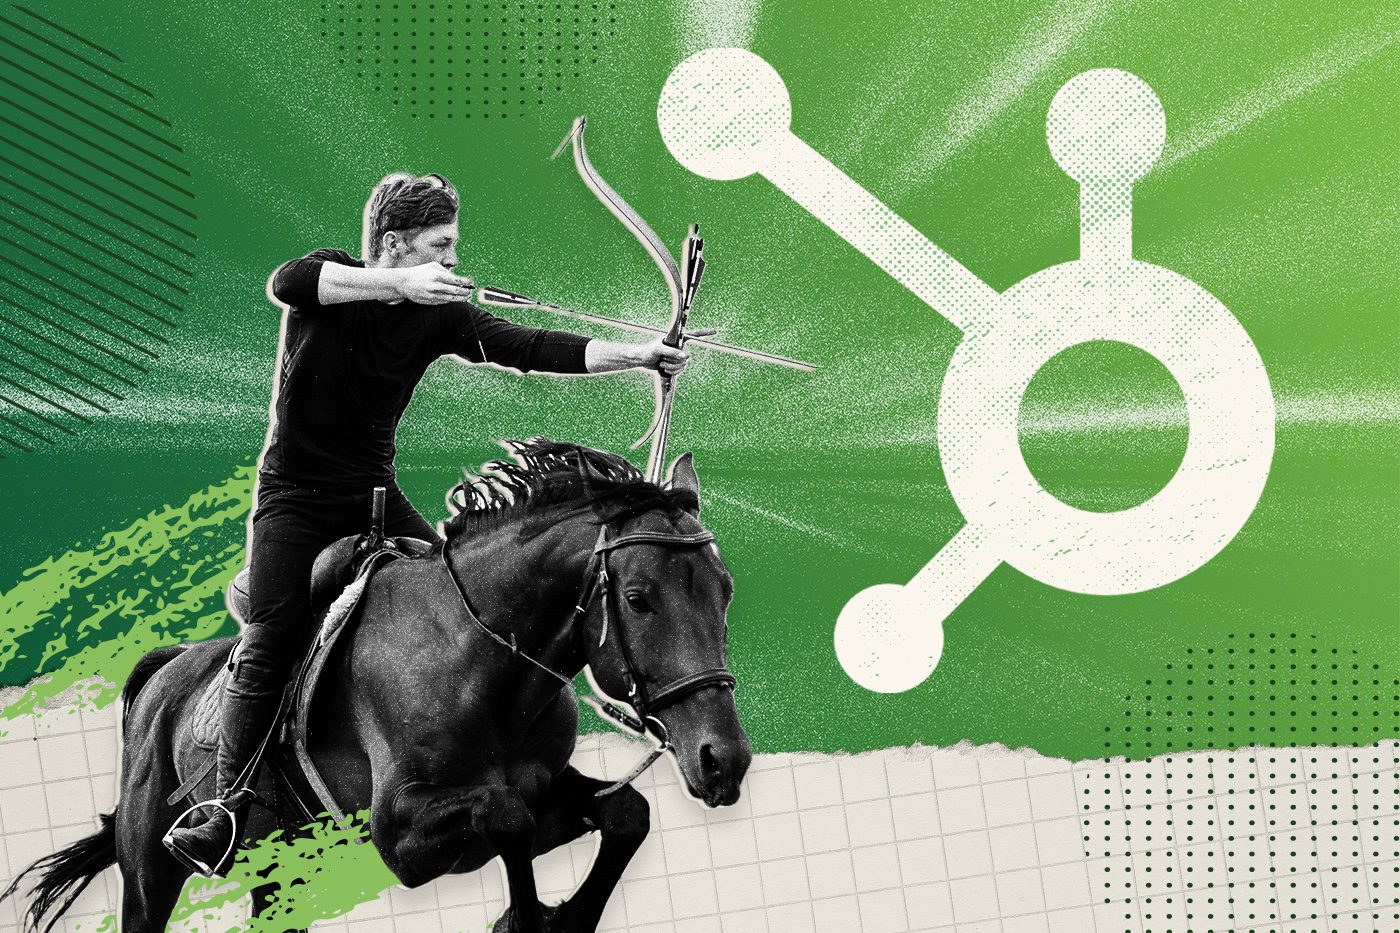 Collage of an archer on a horse aiming for a HubSpot logo to symbolize targeting a strategy in HubSpot